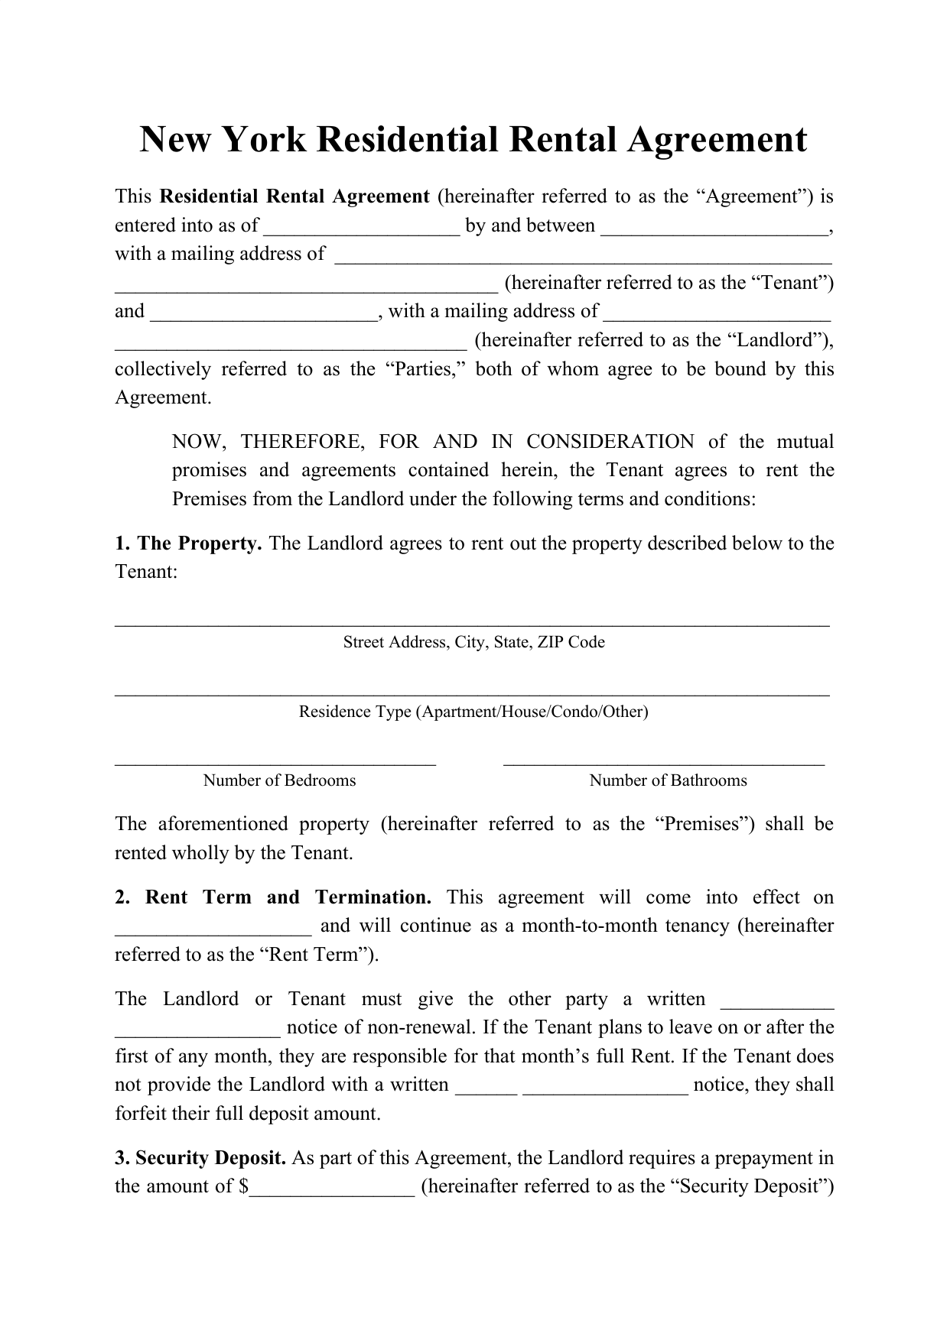 Residential Rental Agreement Template - New York, Page 1